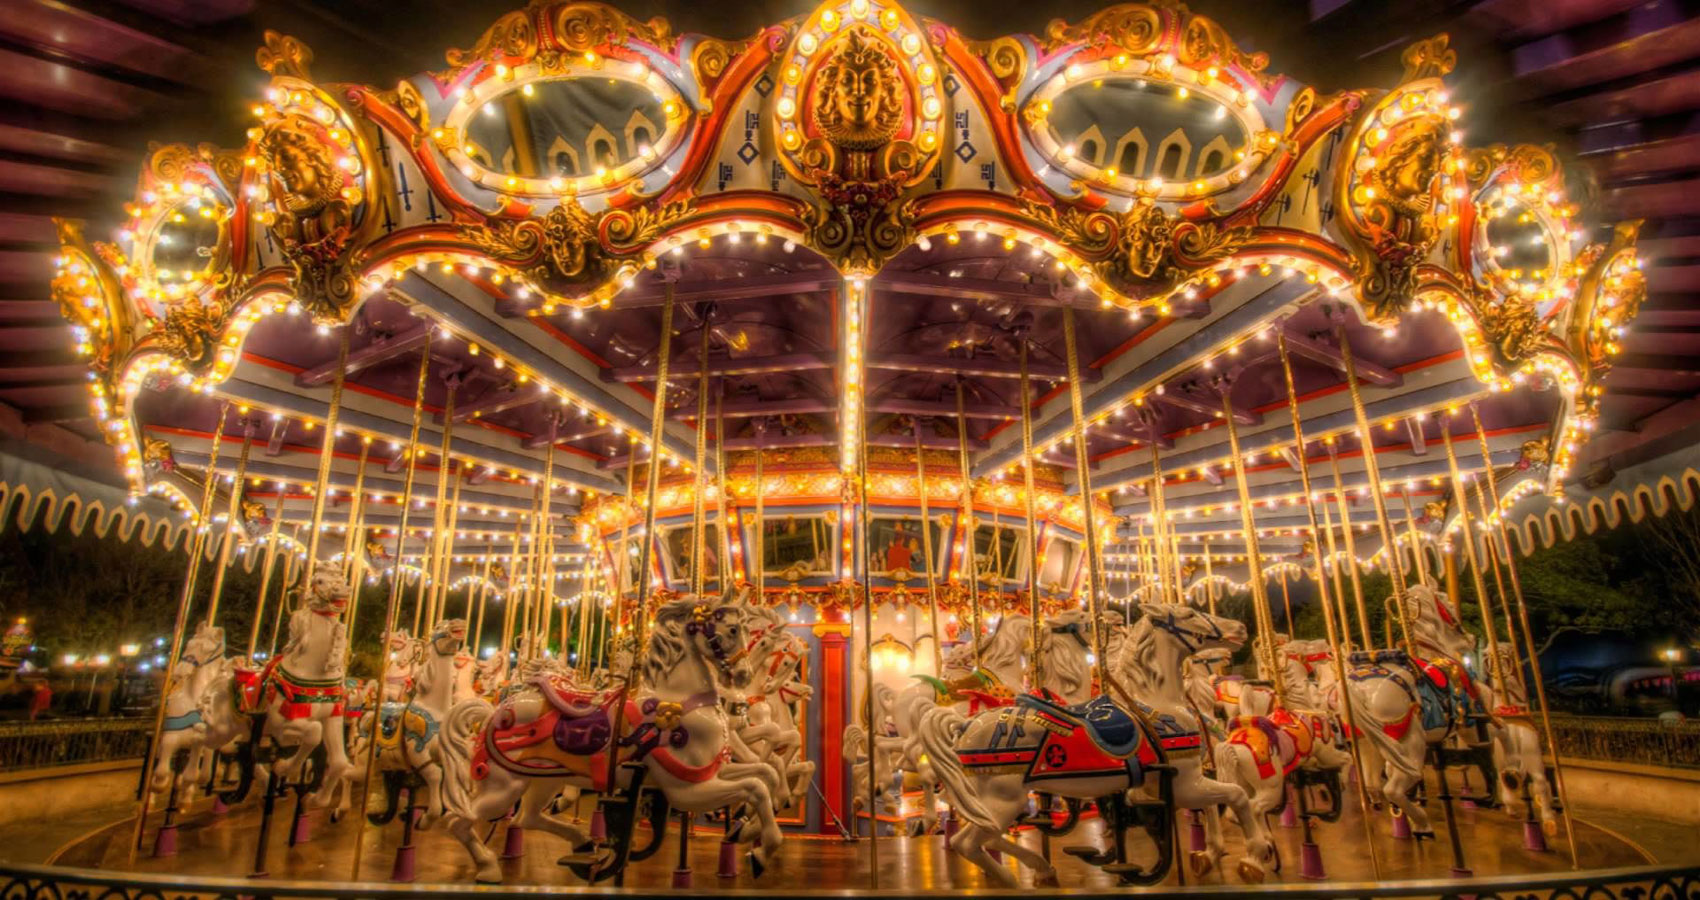 CAROUSEL by Dilip Mohapatra at Spillwords.com